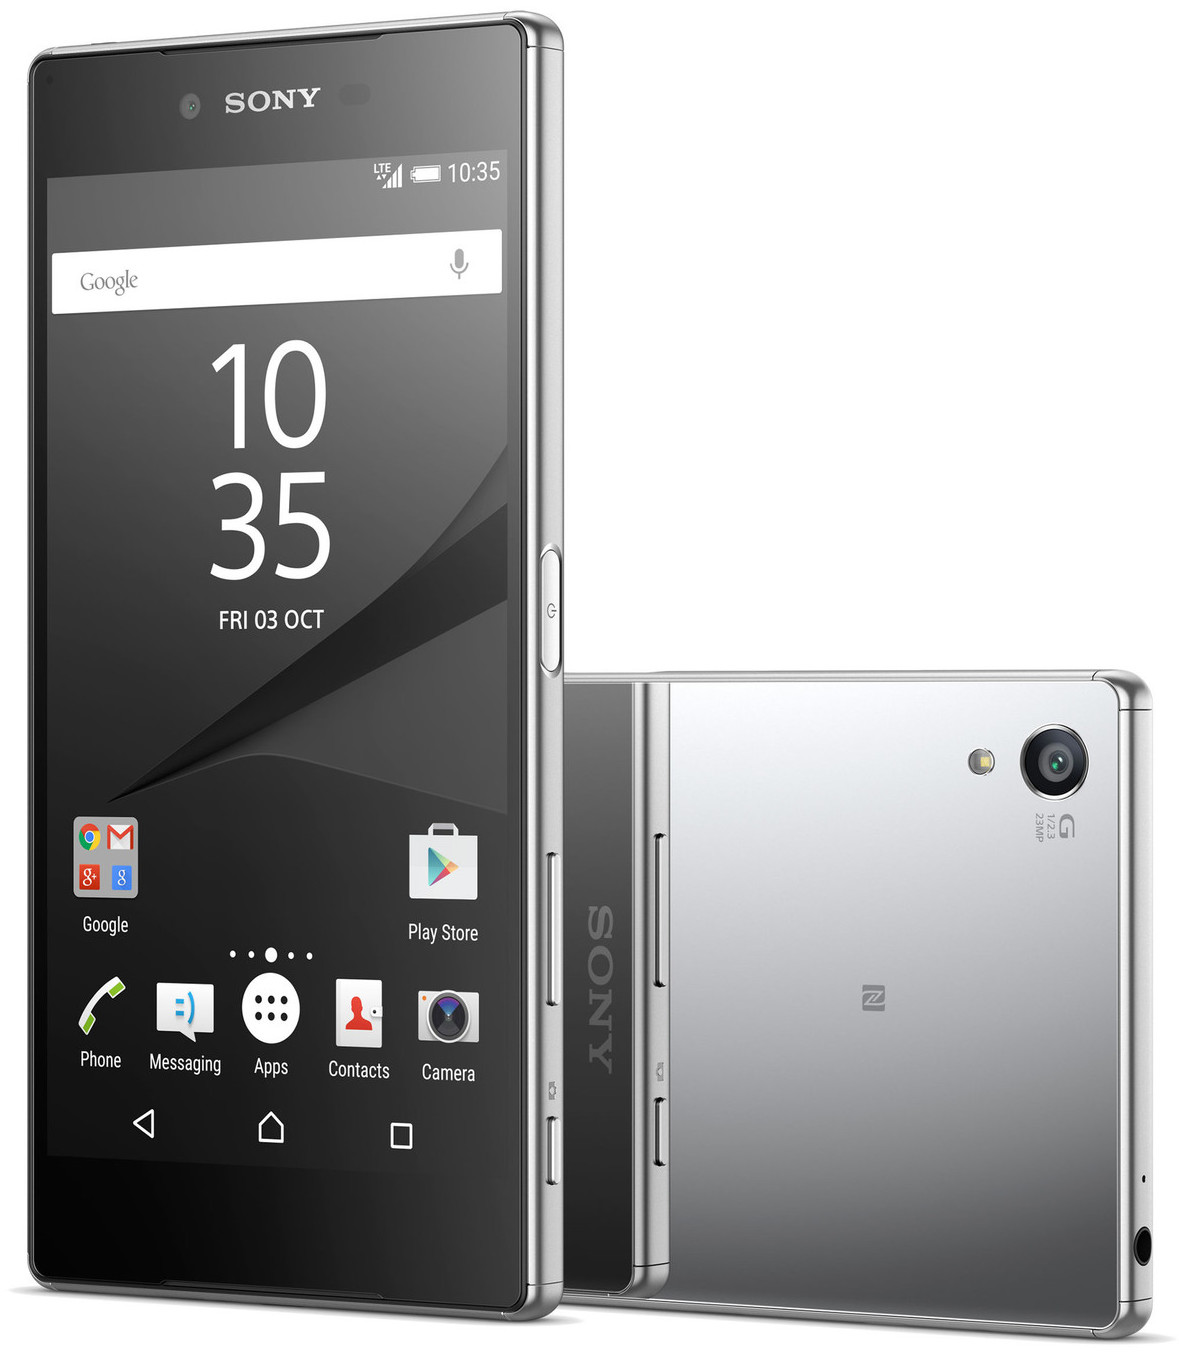 How To Reset Or Bypass Google Account (FRP) On SONY Xperia Premium Dual E6833.